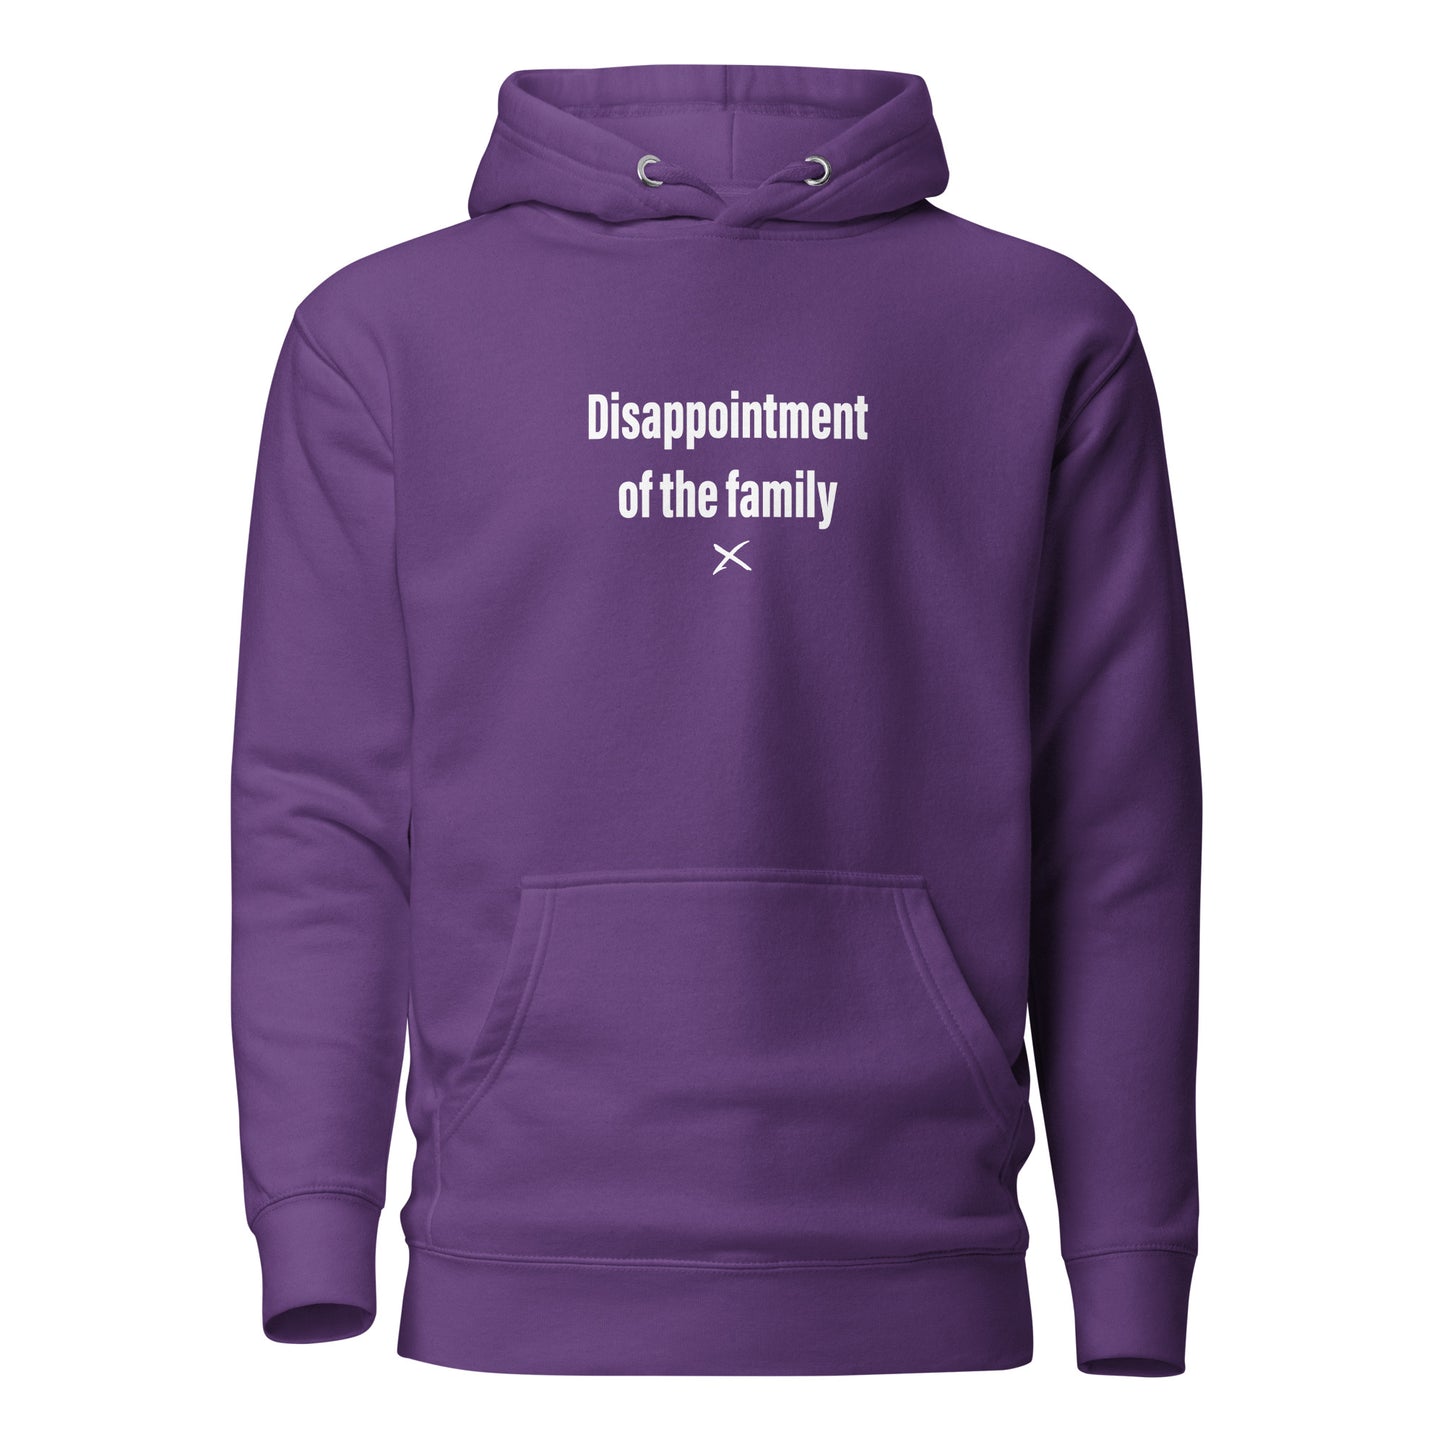 Disappointment of the family - Hoodie